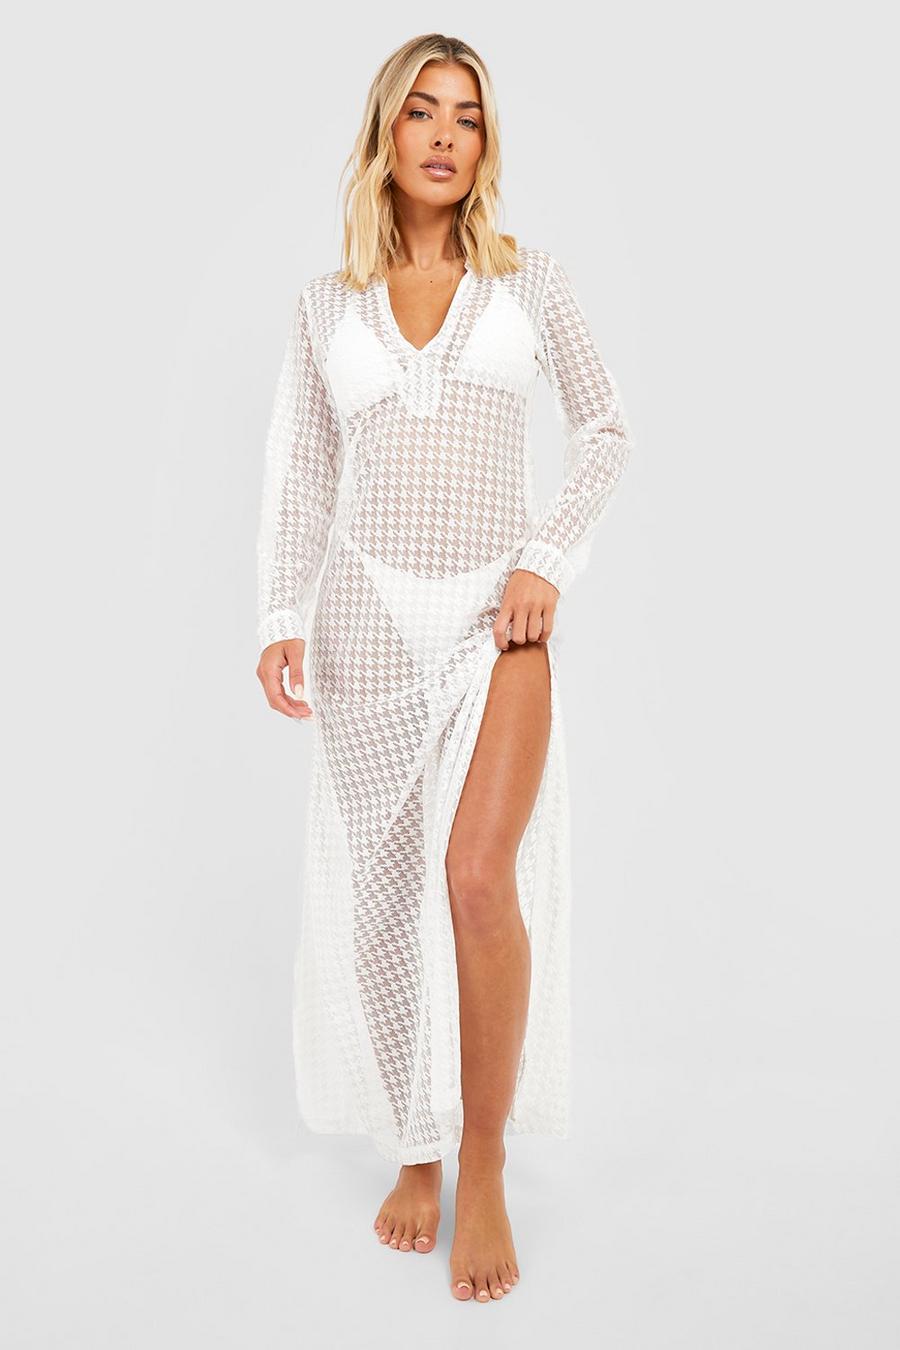 White Dogtooth Lace Beach Cover-up Maxi Dress